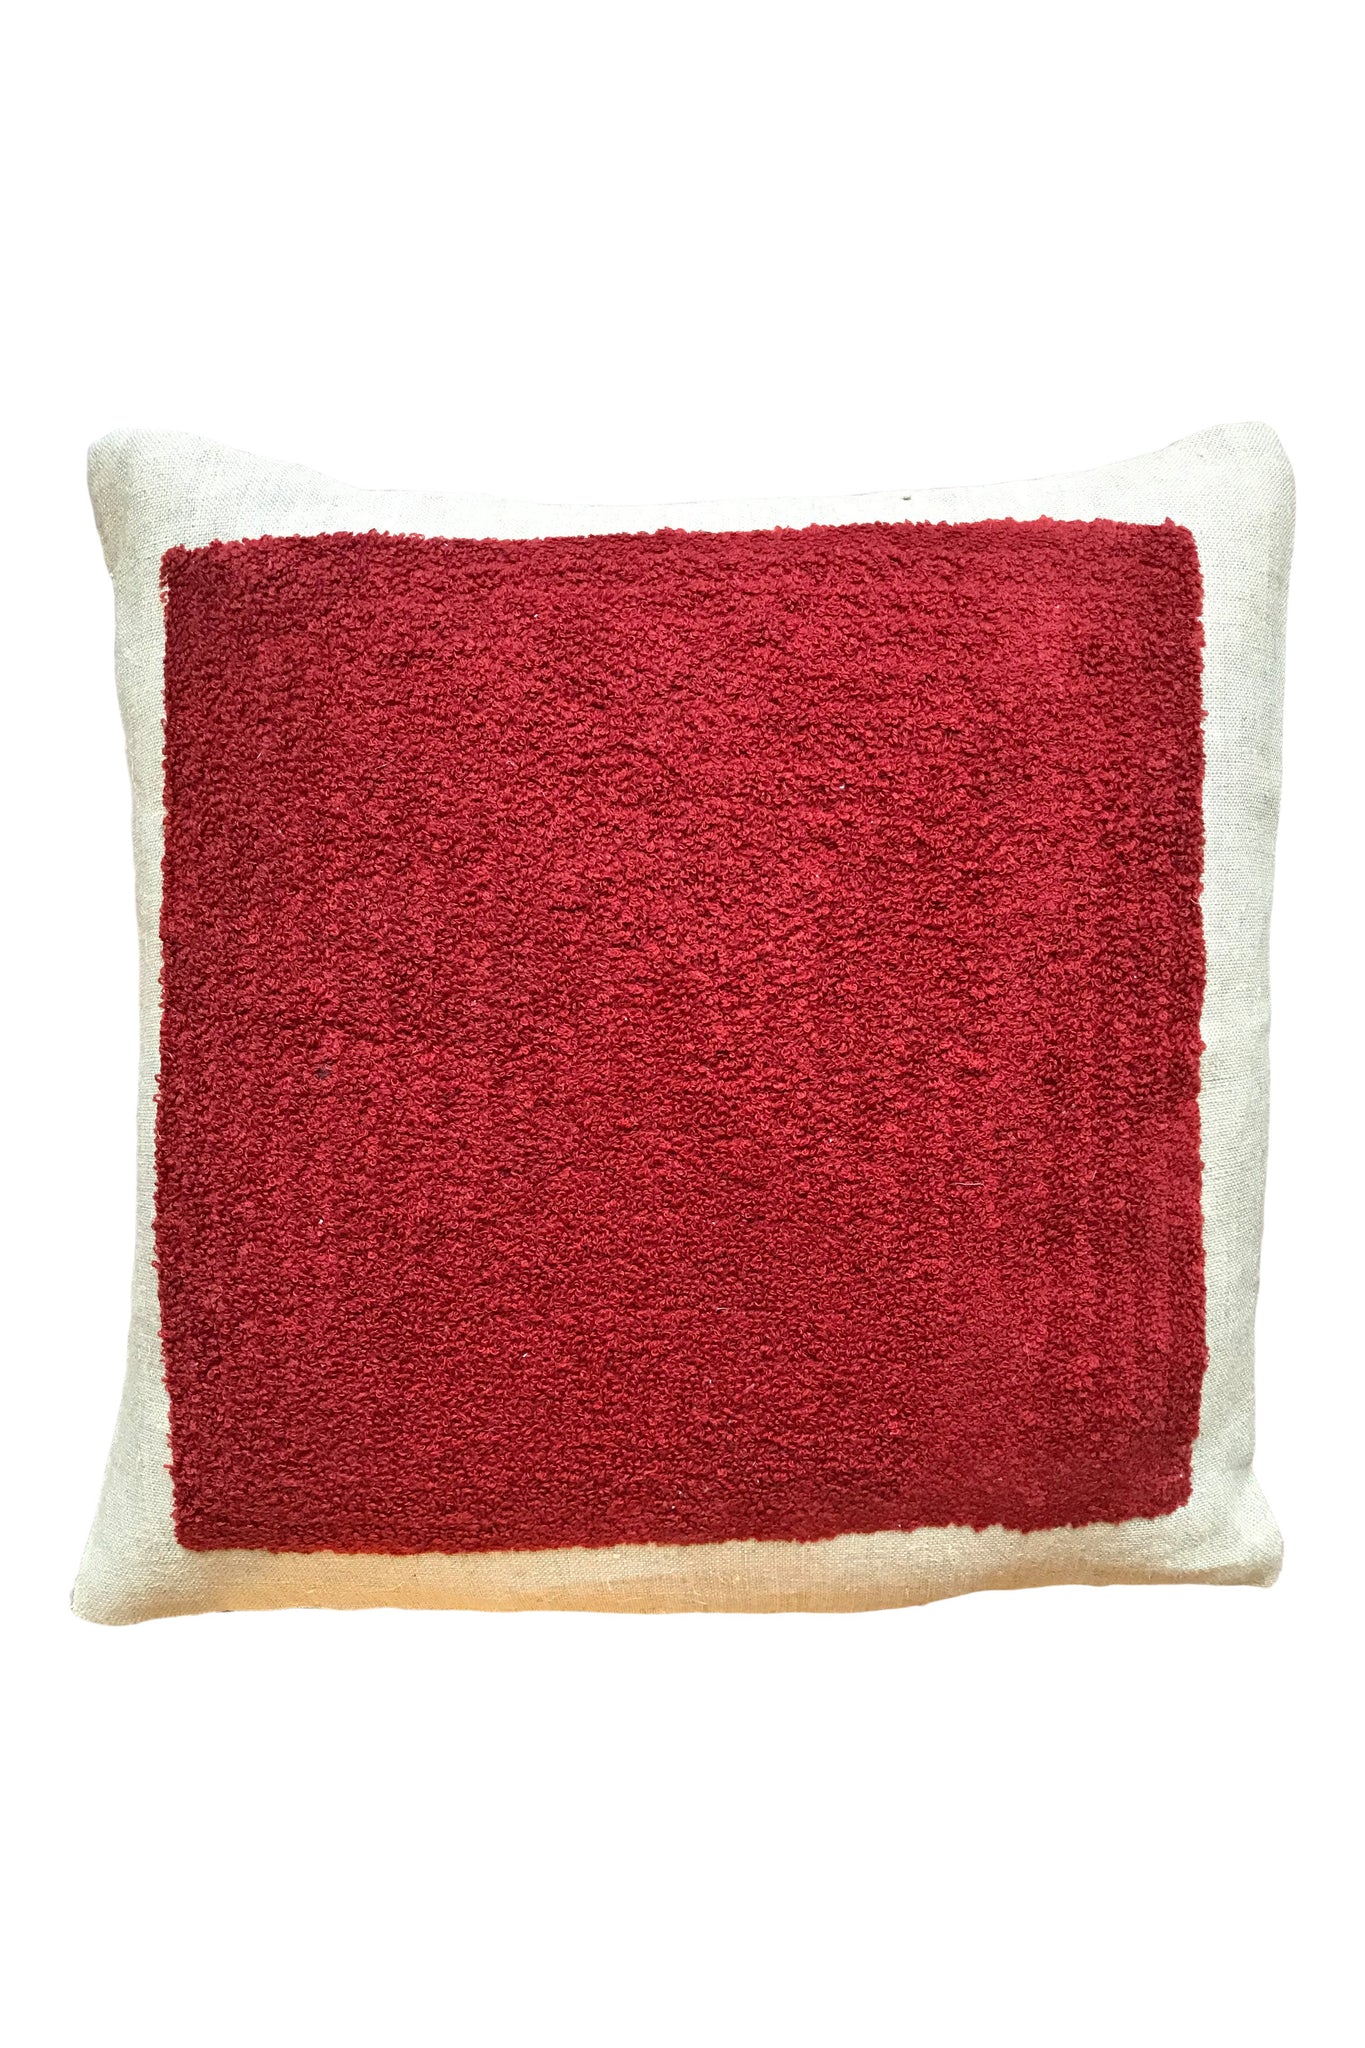 Red square embroidered cushion